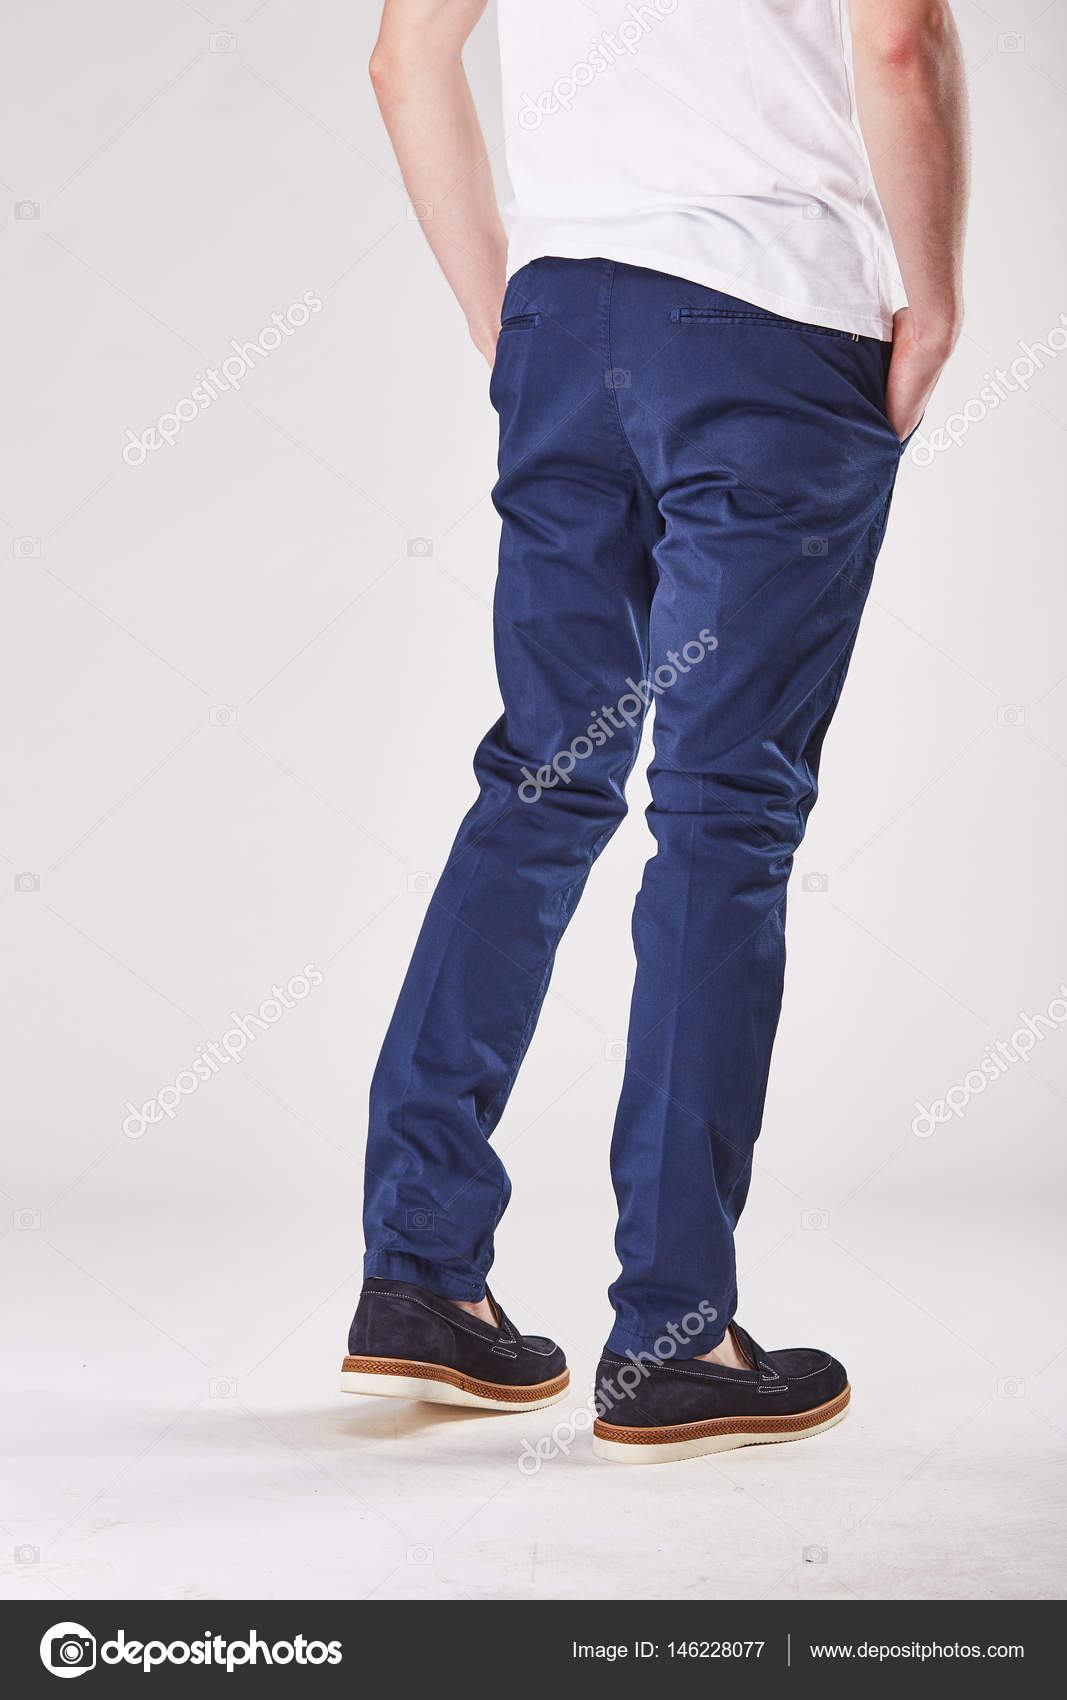 black shoes navy chinos